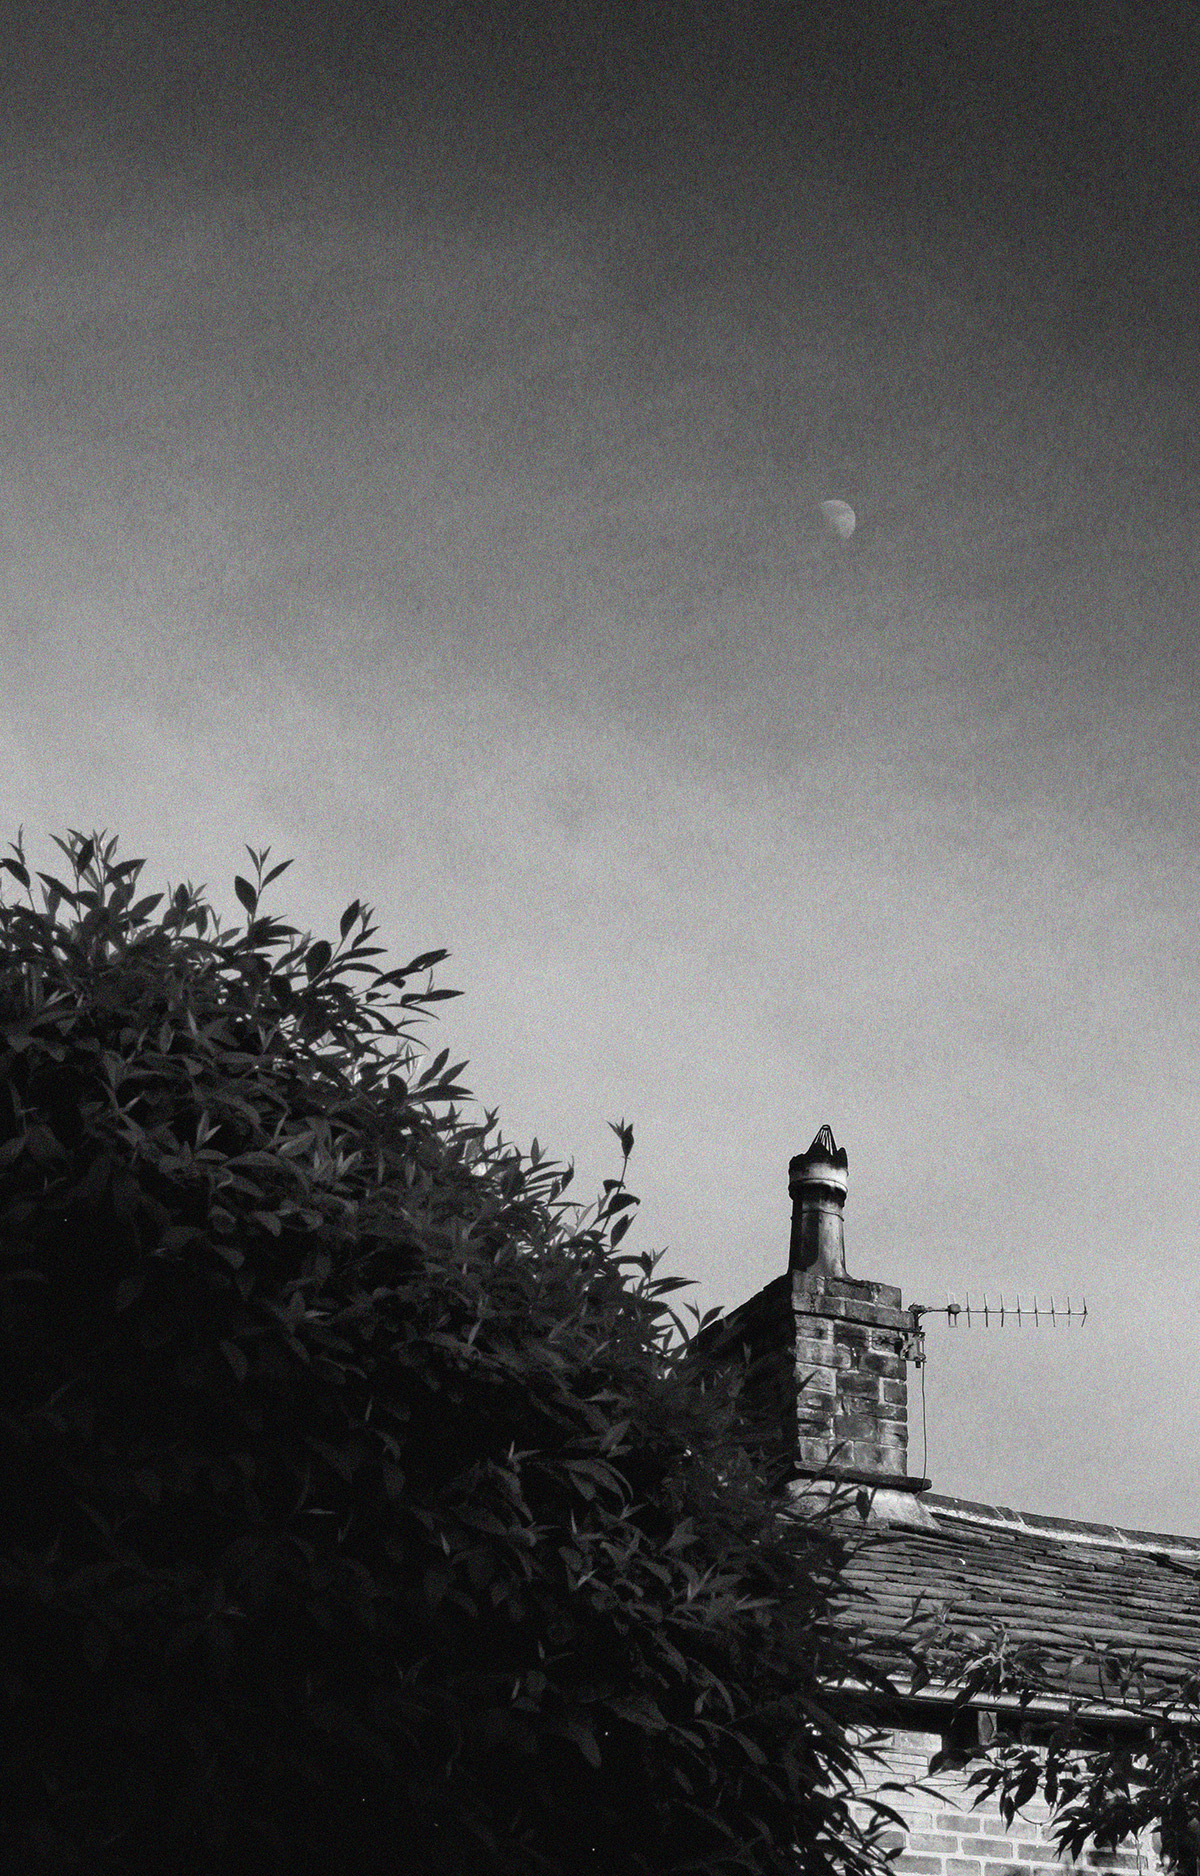 Moon Over Terrace Chimney - Black and white picture of the moon in the sky above the chimney of a terrace house - photo by gavstretchy